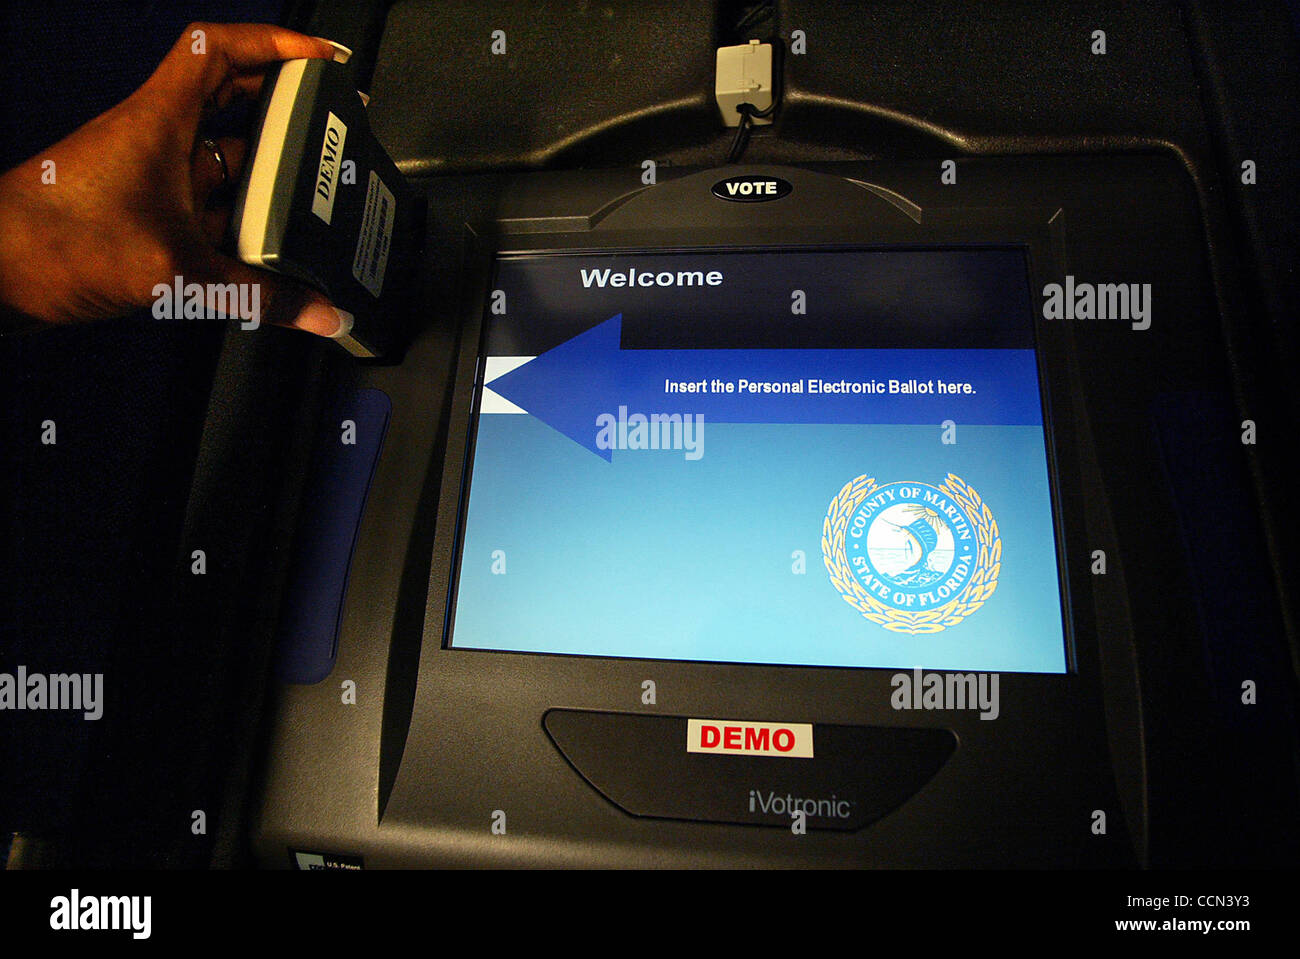 LIVE METRO, STUART, 8/6/04.....Martin County voters will be using touch screen electronic machines to cast their votes this election.  First step is the machine is activated my a poll worker. Photo by David Lane Stock Photo